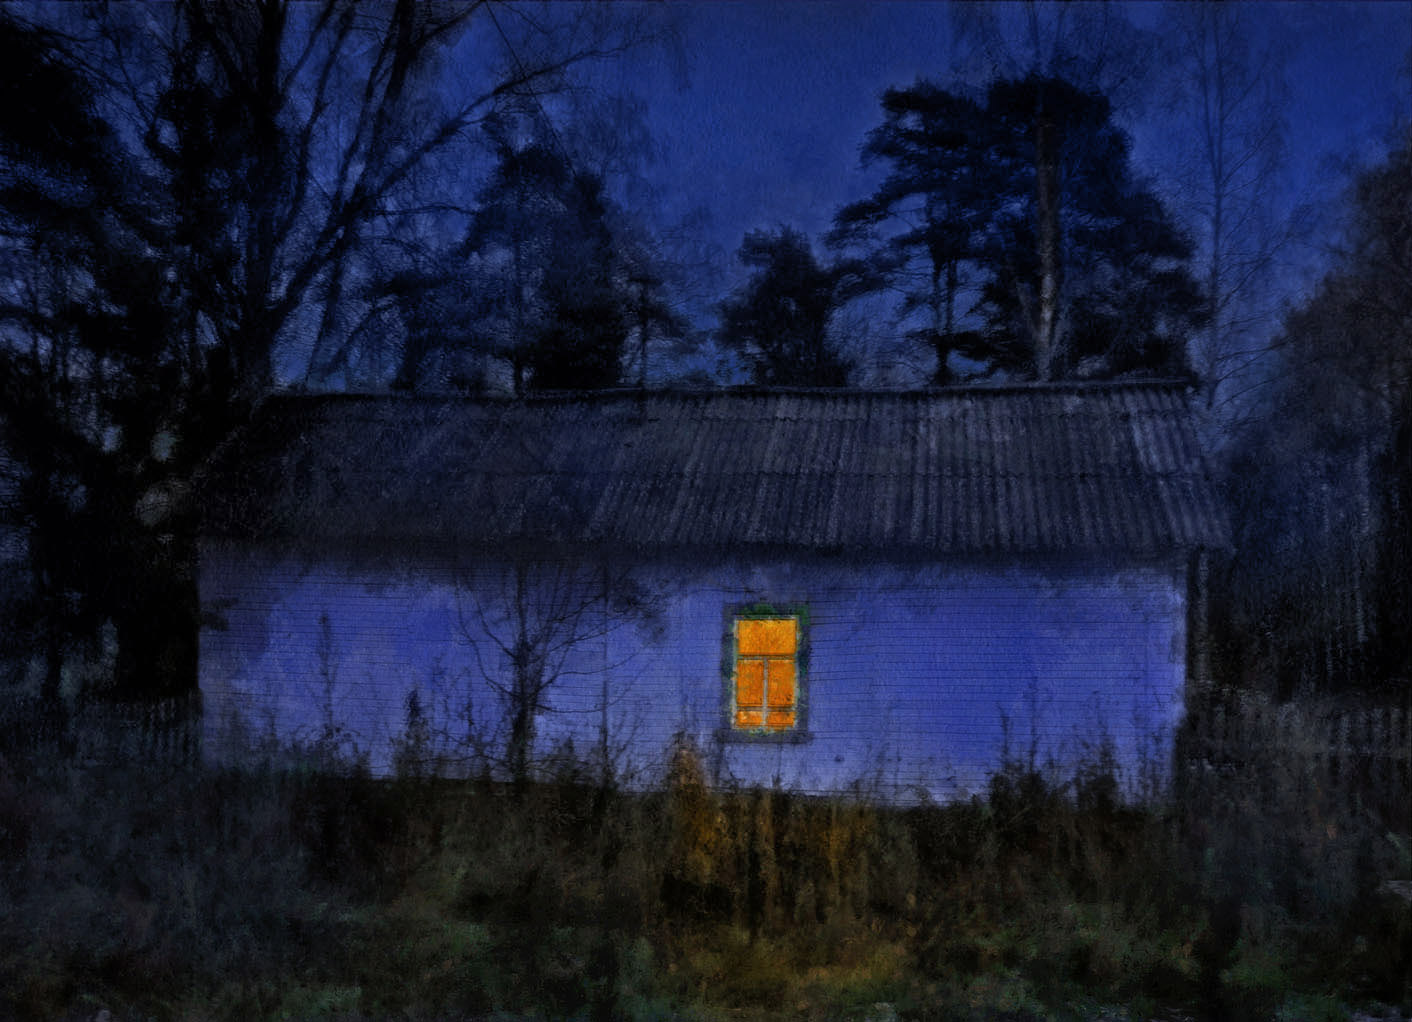 The House Of Blue Light